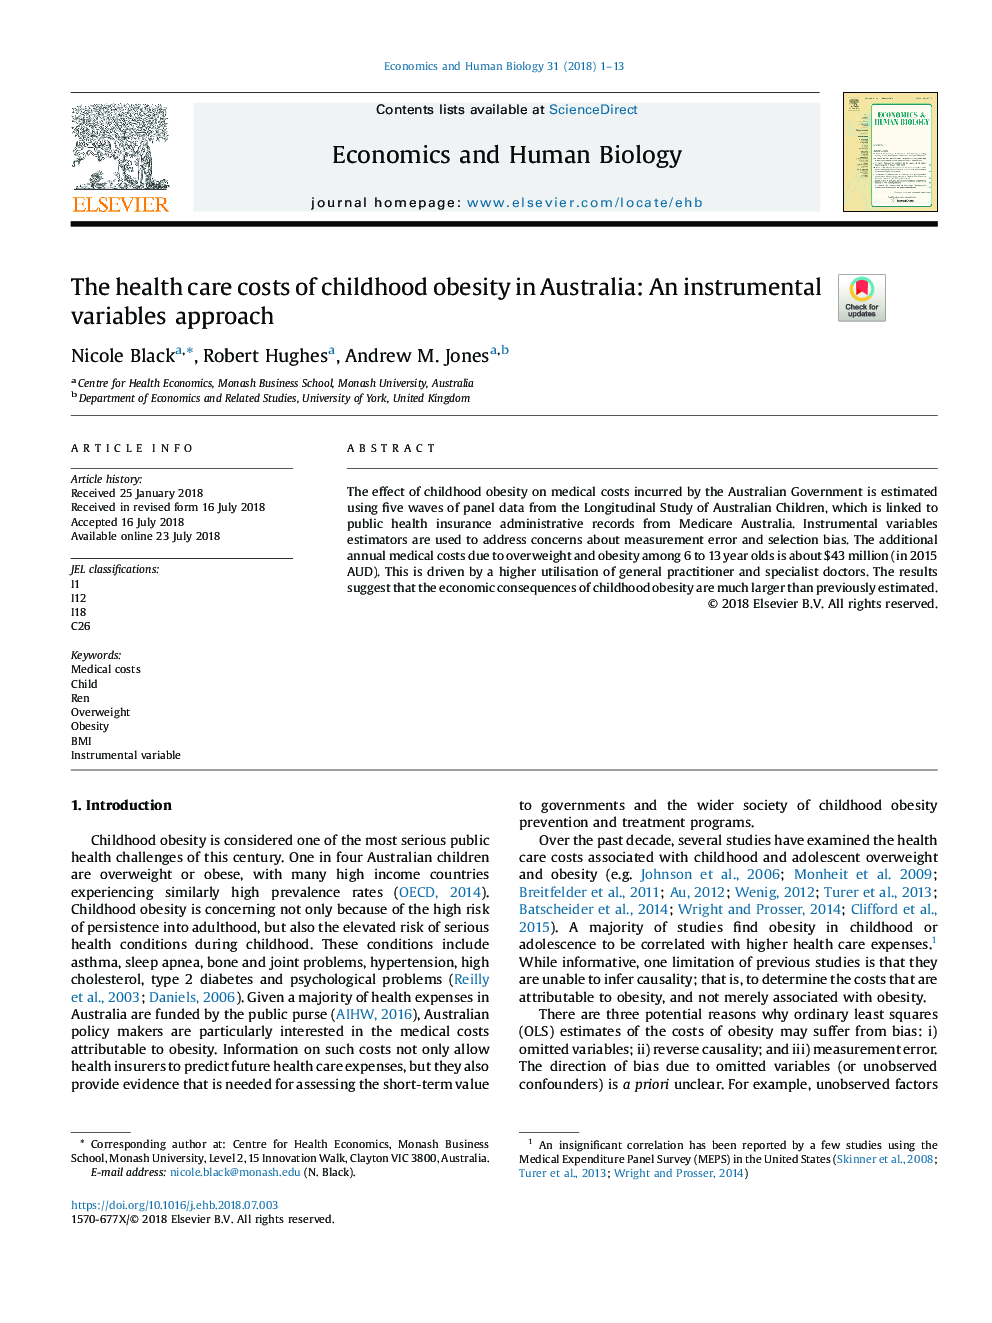 The health care costs of childhood obesity in Australia: An instrumental variables approach